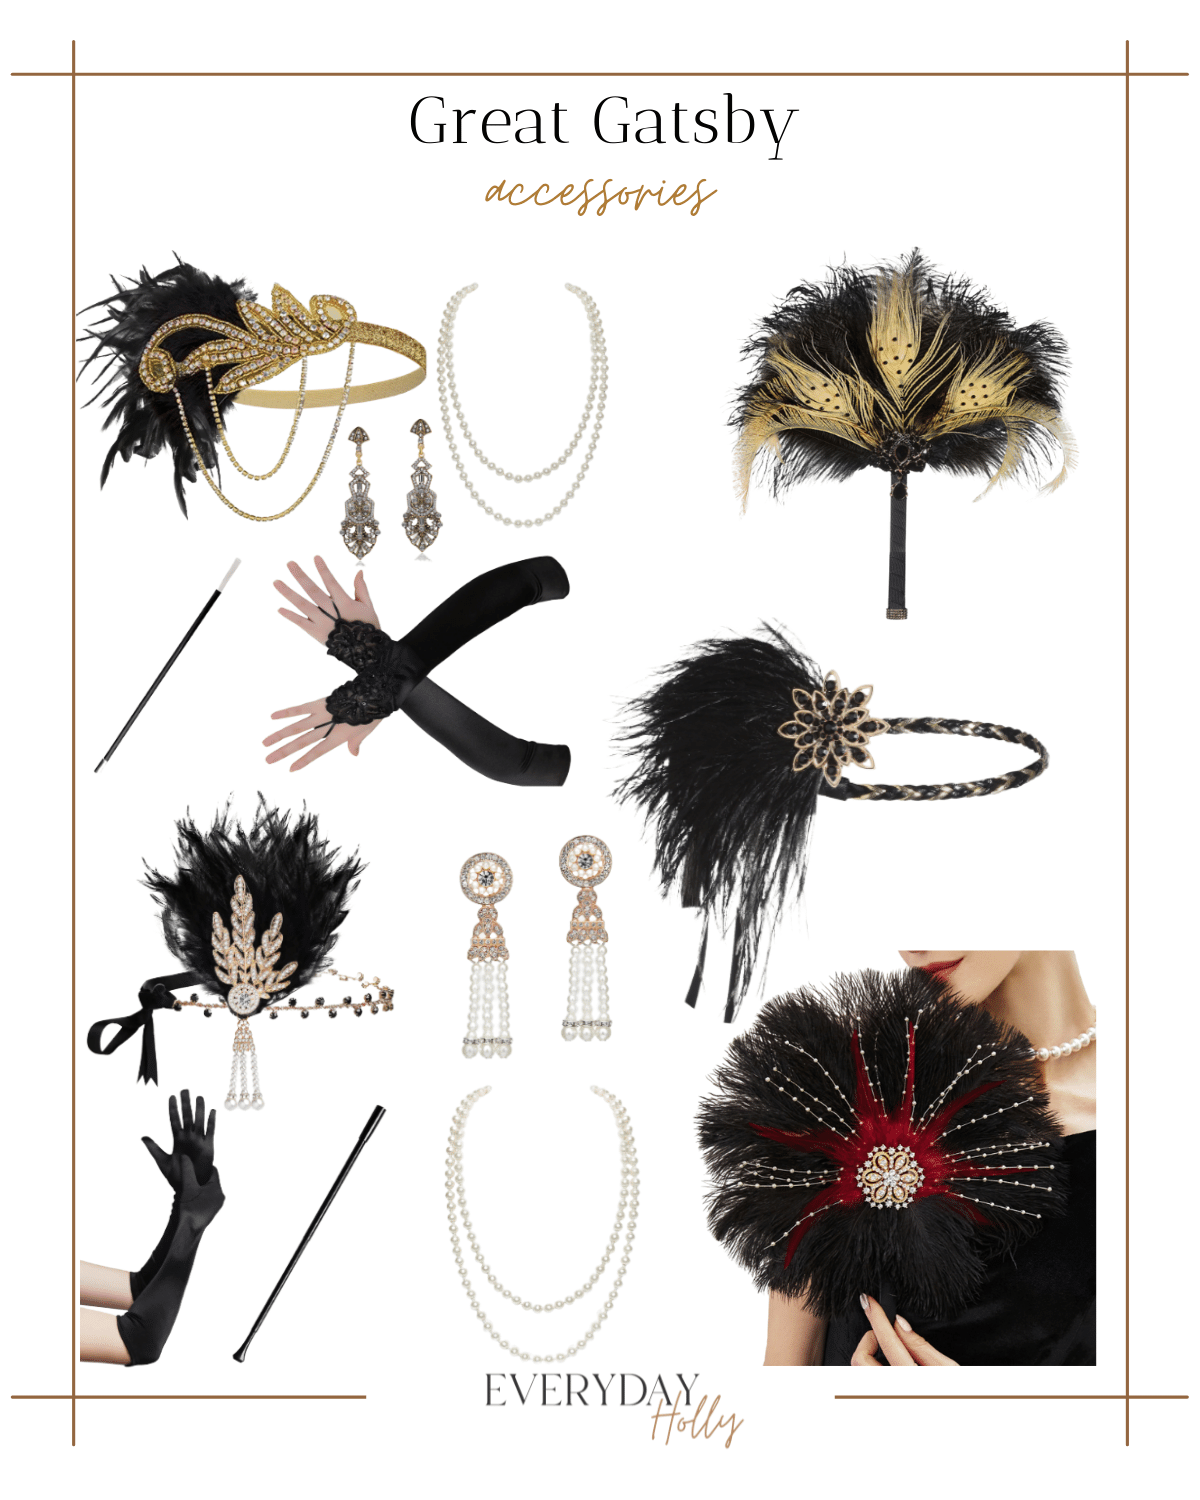 black and gold accessory set, black and gold feathered fan, black feathered headband, black and champagne accessory set, black and red feathered fan 